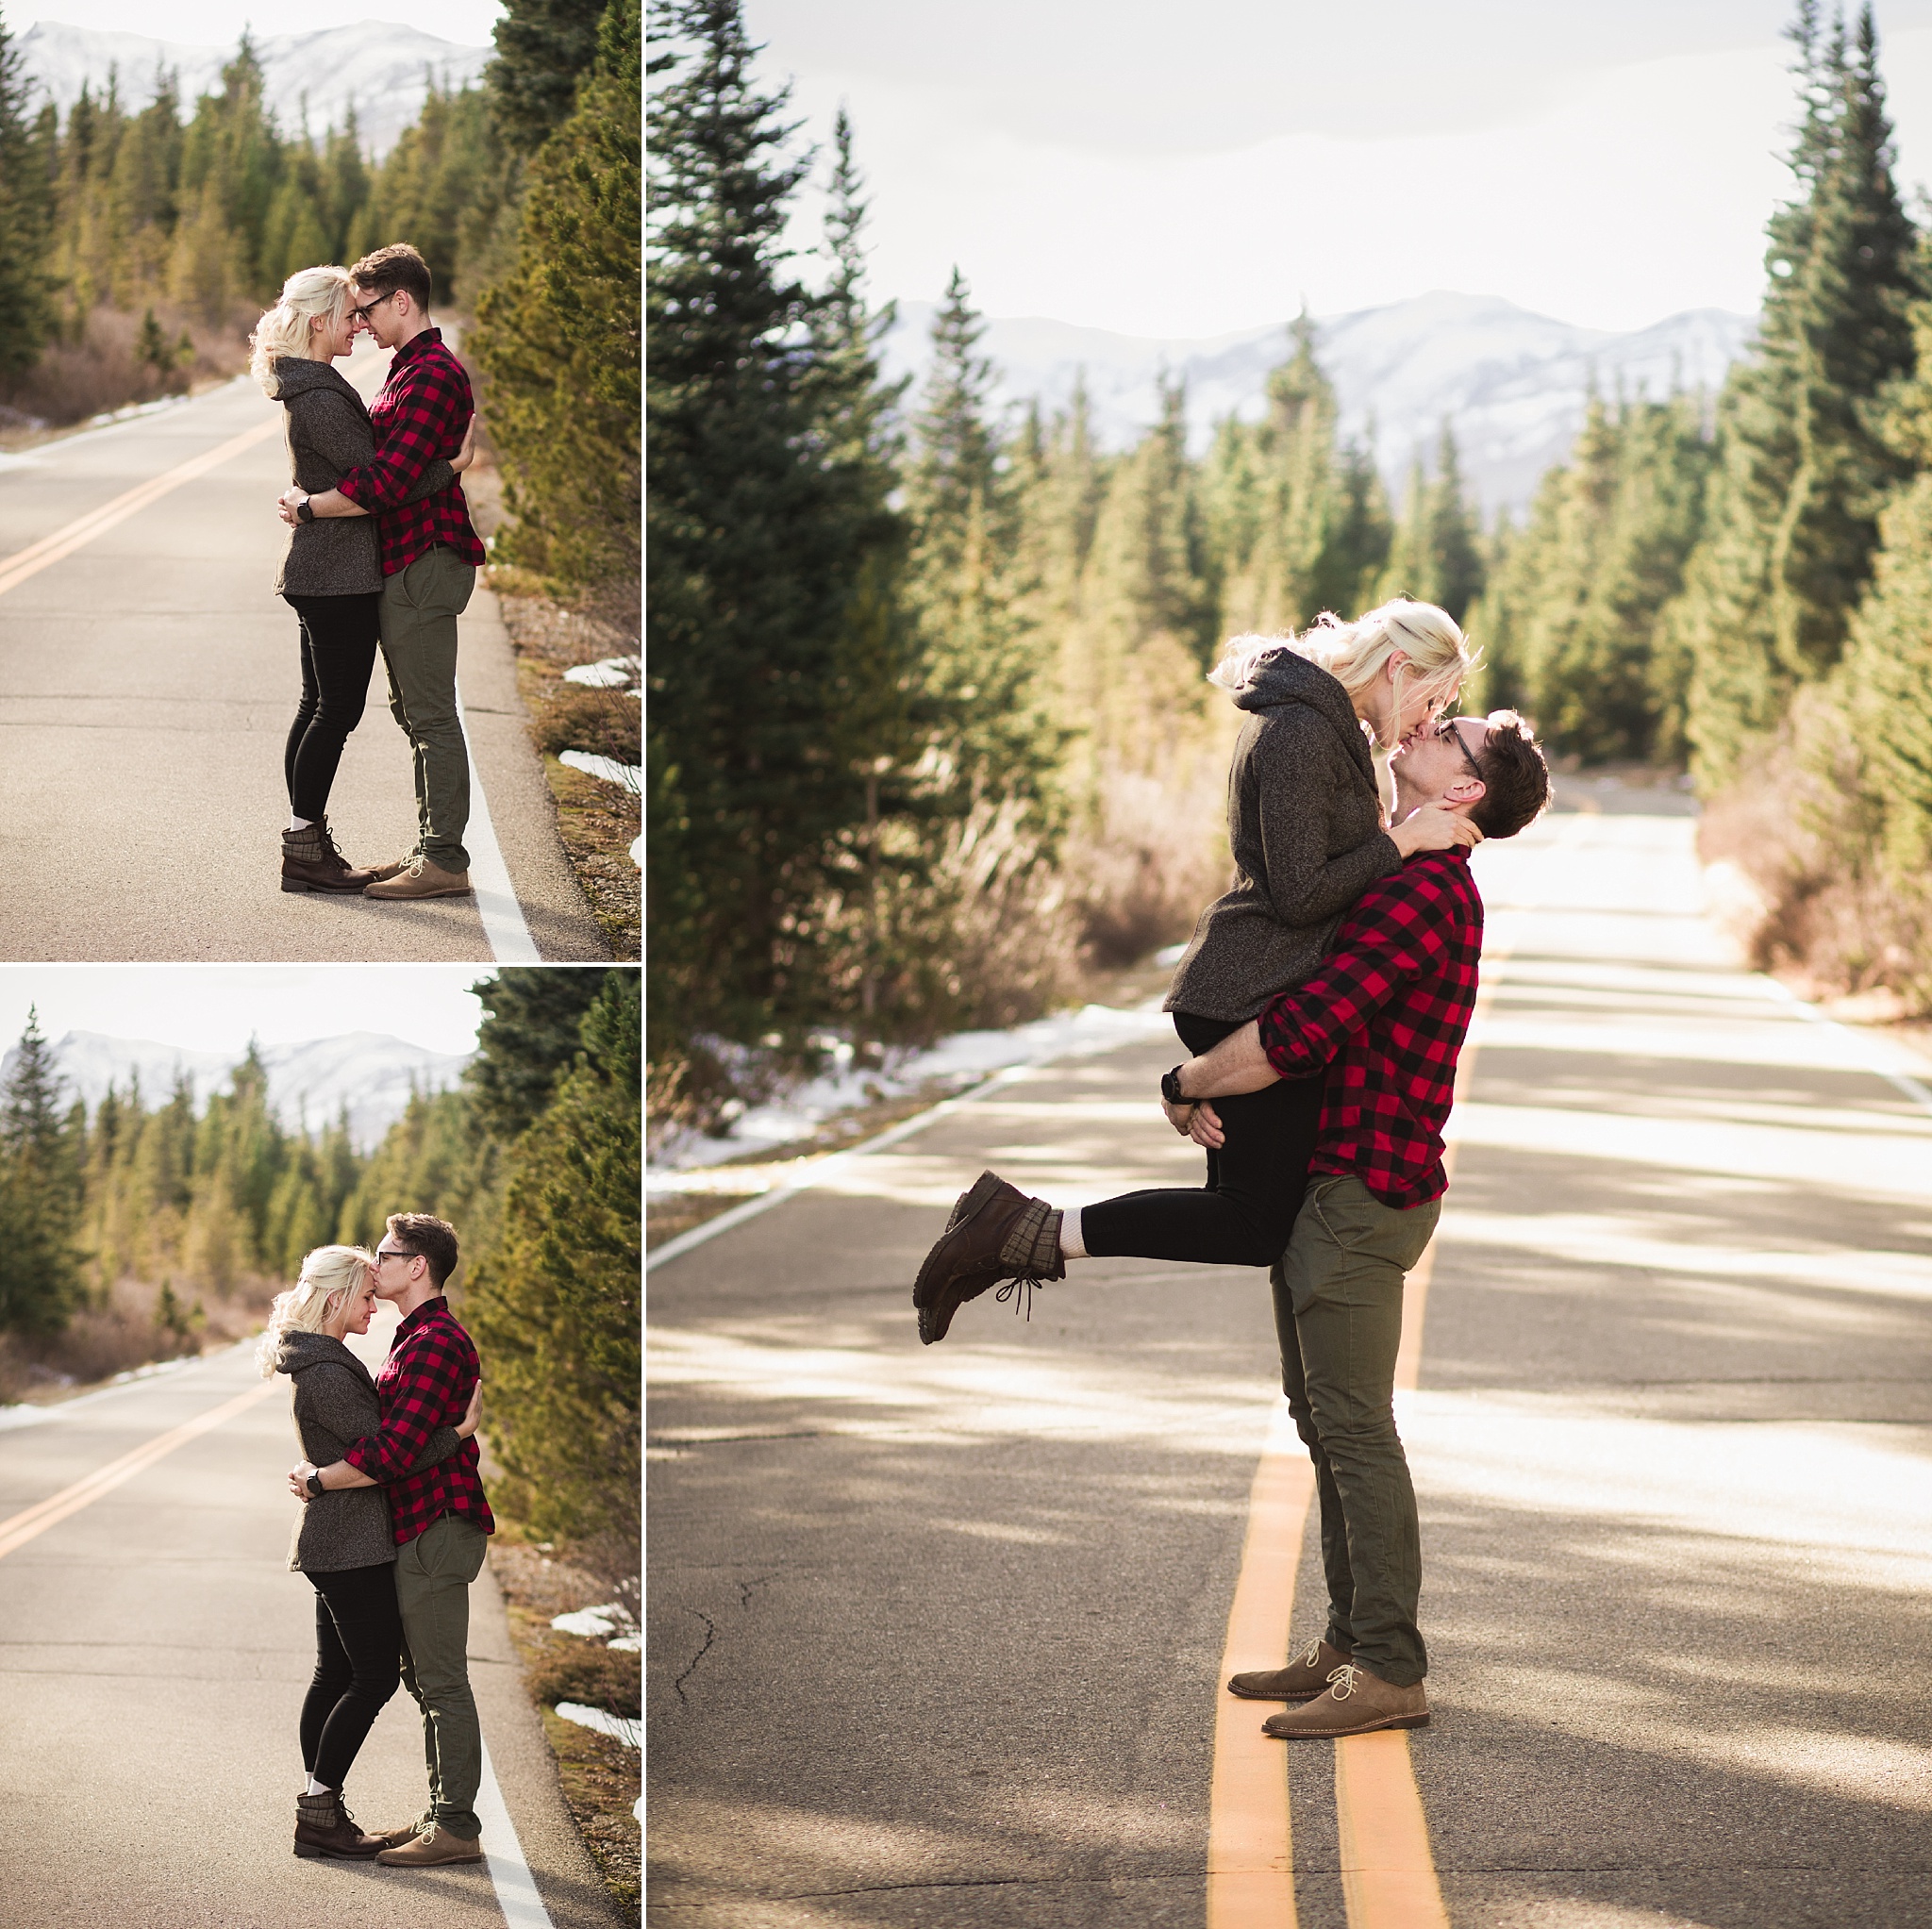 Man lifting his fiancé on a mountain road at sunset during their engagement session. Amy & Jonathan’s Brainard Lake Winter Engagement Session by Colorado Engagement Photographer, Jennifer Garza. Colorado Engagement Photographer, Colorado Engagement Photography, Brainard Lake Engagement Session, Brainard Lake Engagement Photos, Mountain Engagement Session, Colorado Winter Engagement Photos, Winter Engagement Photography, Mountain Engagement Photographer, Colorado Wedding, Colorado Bride